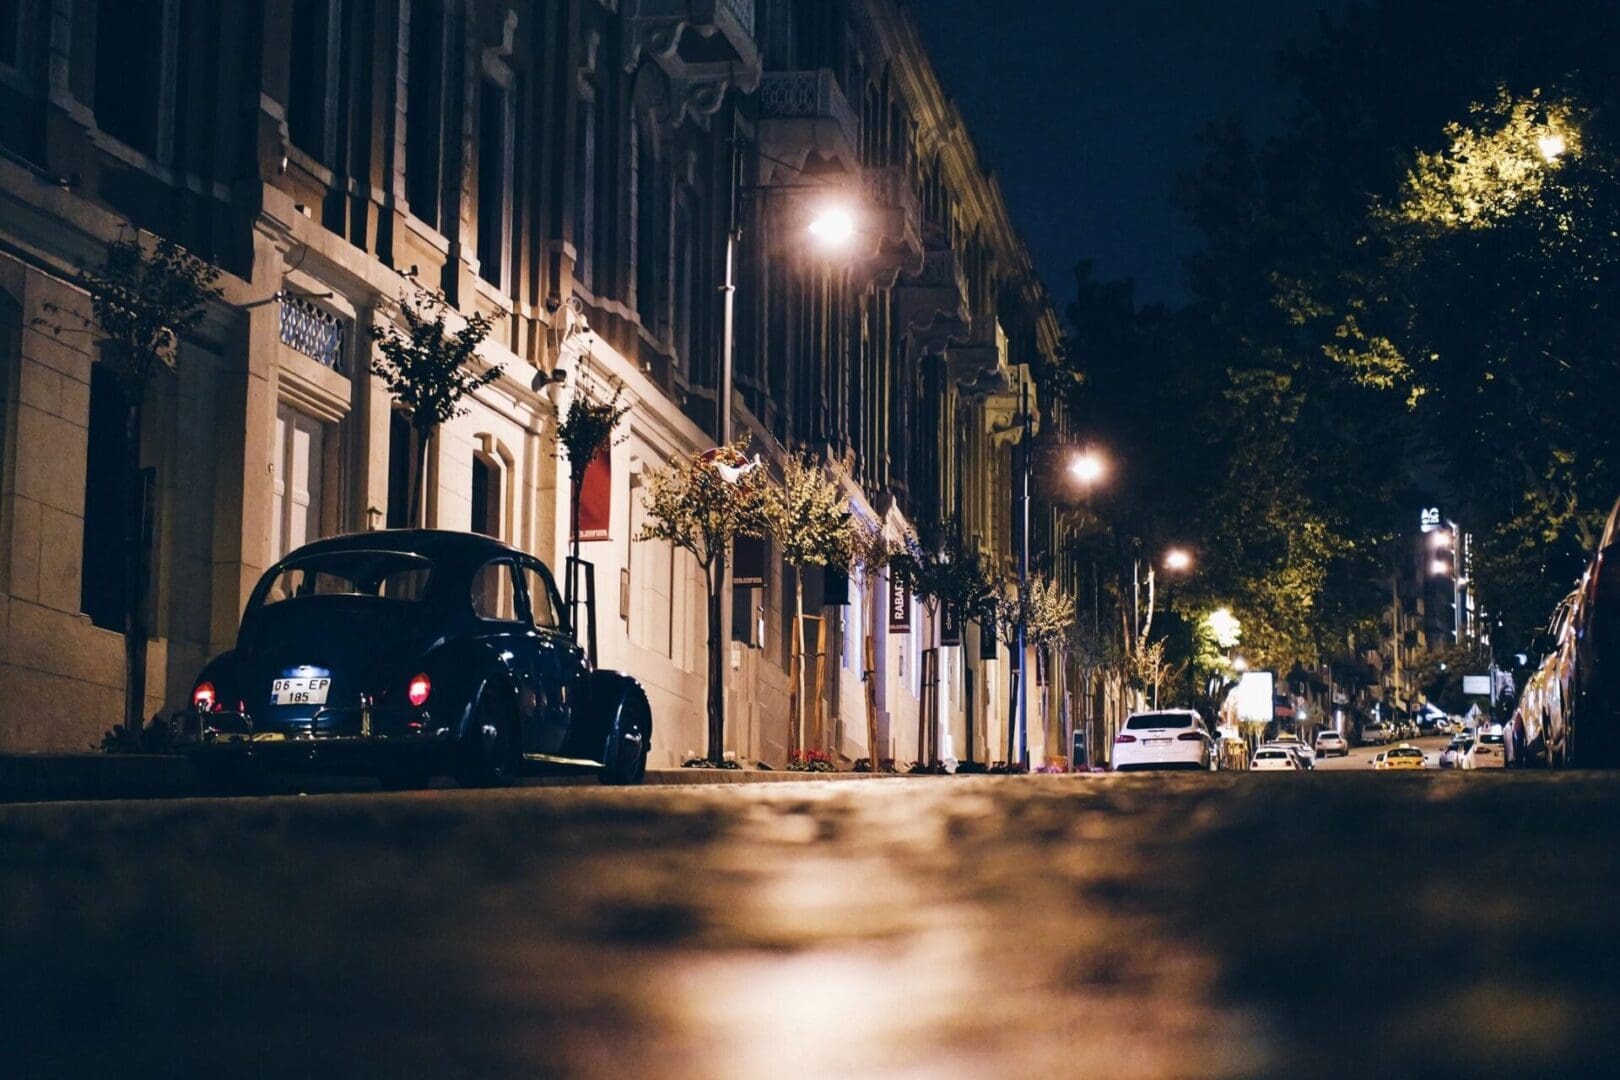 A vintage car parked on a quiet city street at night, illuminated by streetlights.